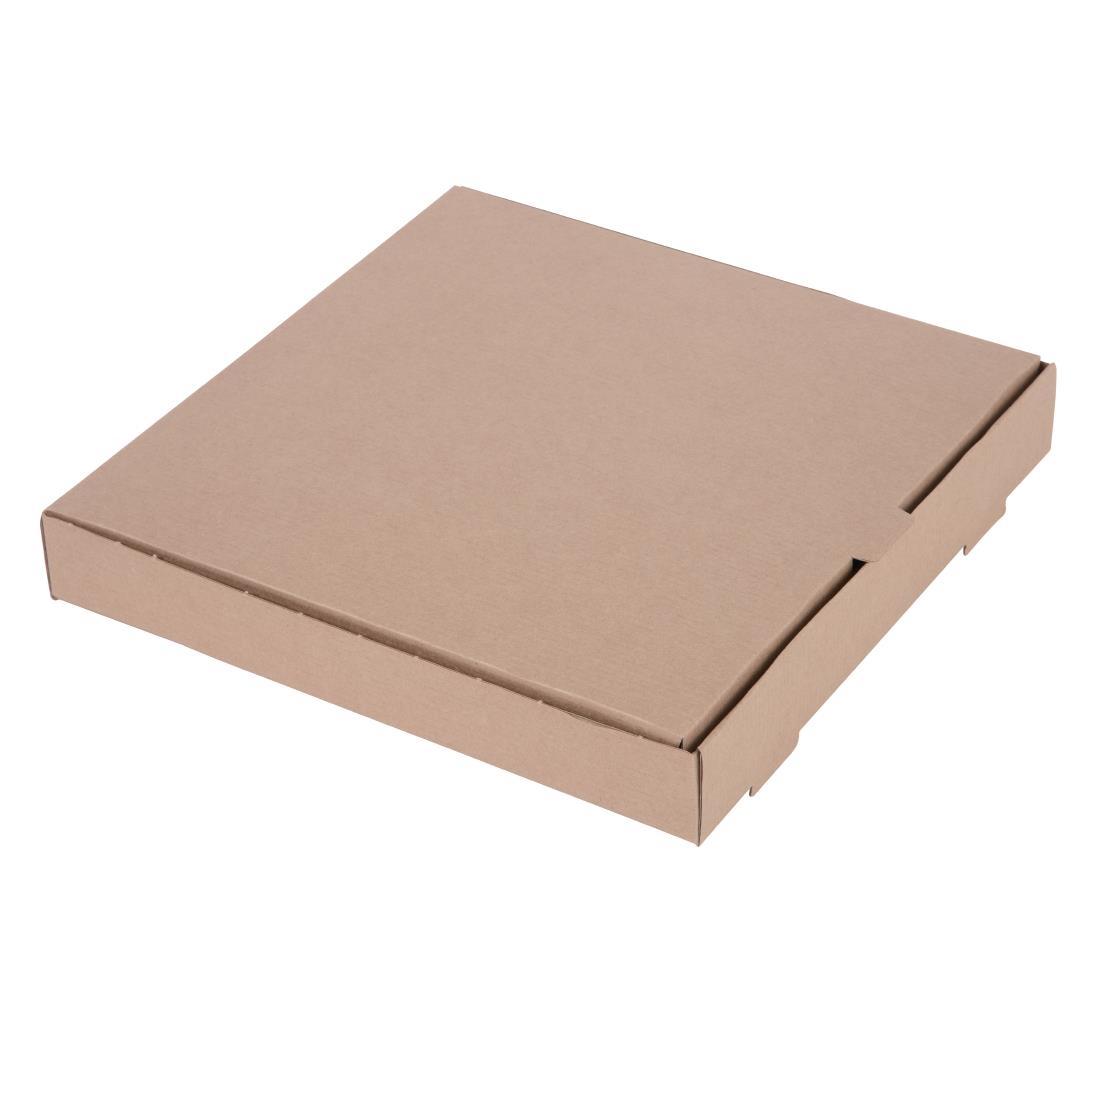 Fiesta Compostable Plain Pizza Boxes 12" (Pack of 100) - DC724  - 1